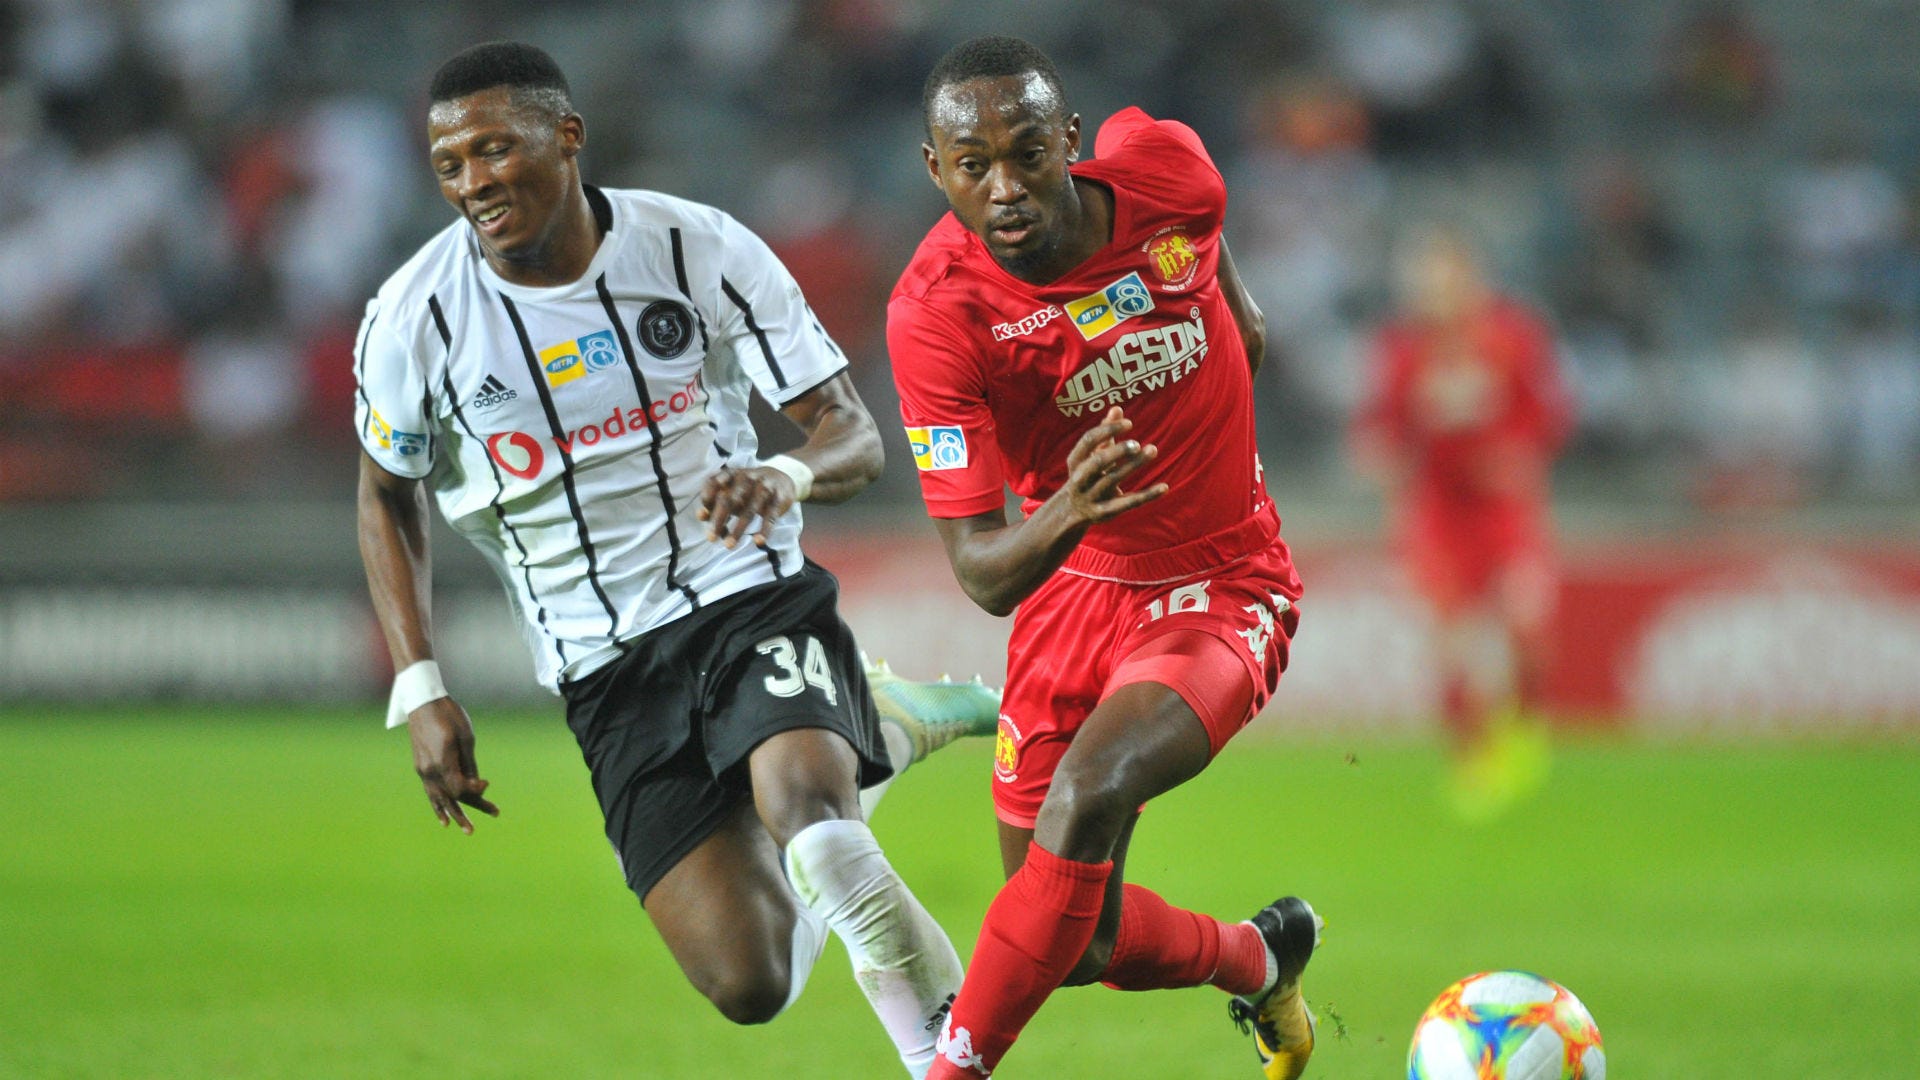 Thabiso Monyane of Orlando Pirates, Peter Shalulile of Highlands Park - August 2019